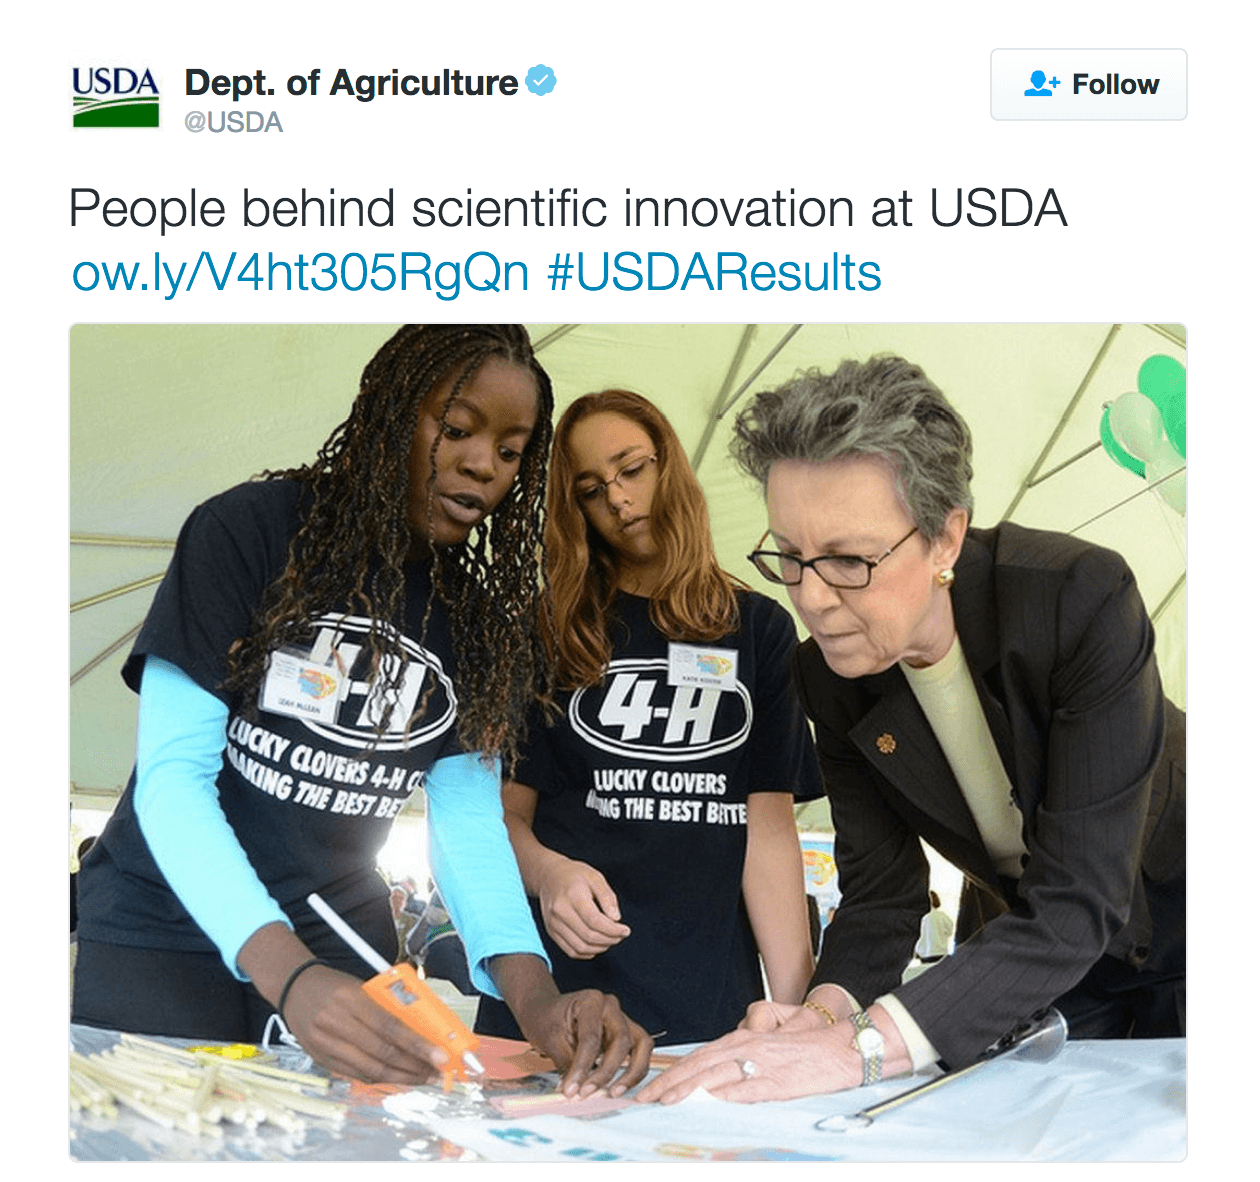 People behind scientific innovation at USDA http://ow.ly/V4ht305RgQn  #USDAResults